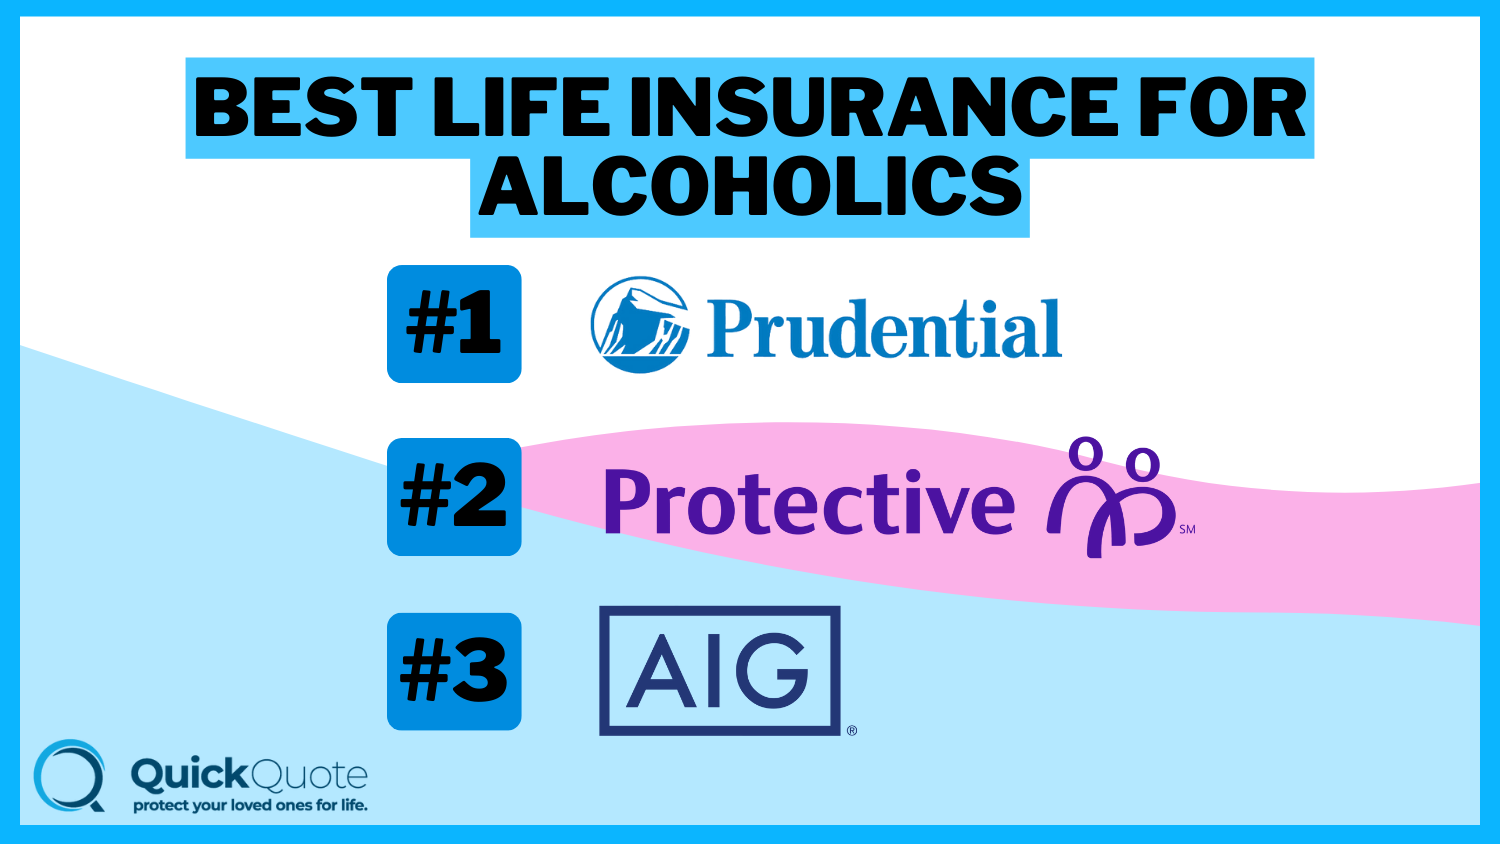 Best Life Insurance for Alcoholics: Prudential, Protective, and AIG